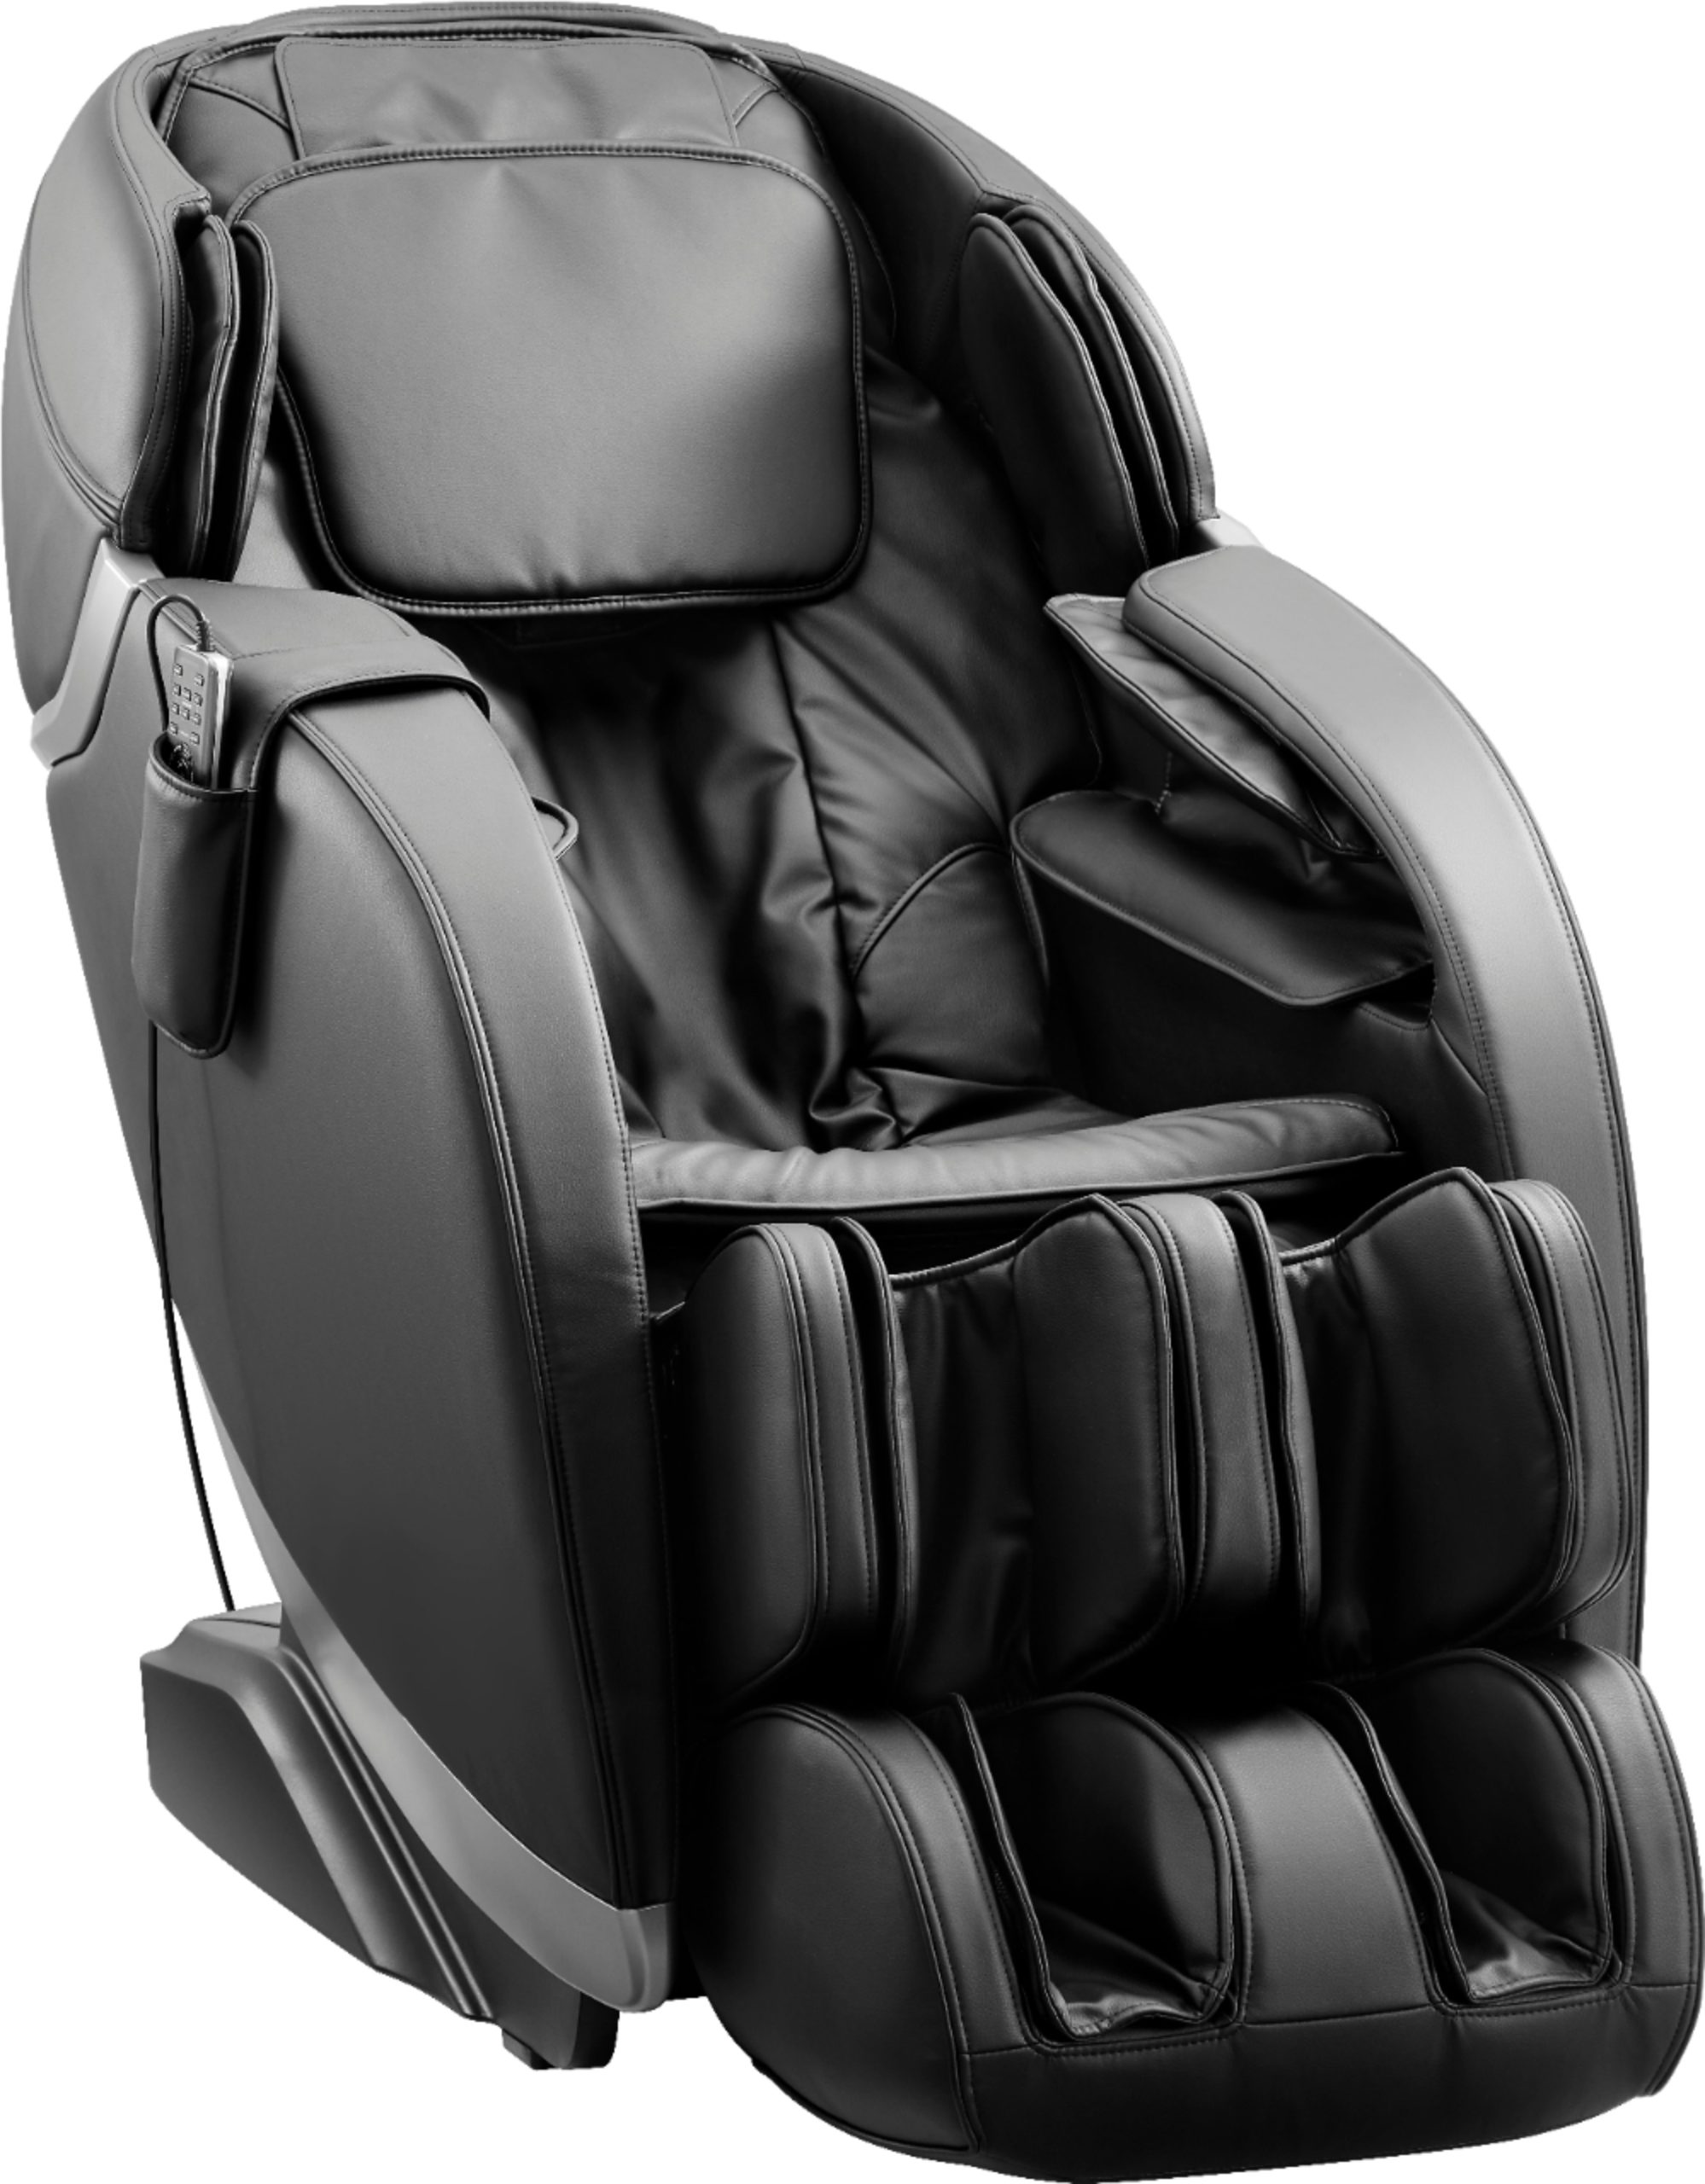 Insignia™ – 2D Zero Gravity Full Body Massage Chair – Black with silver trim – Just $1874.99 at Best Buy